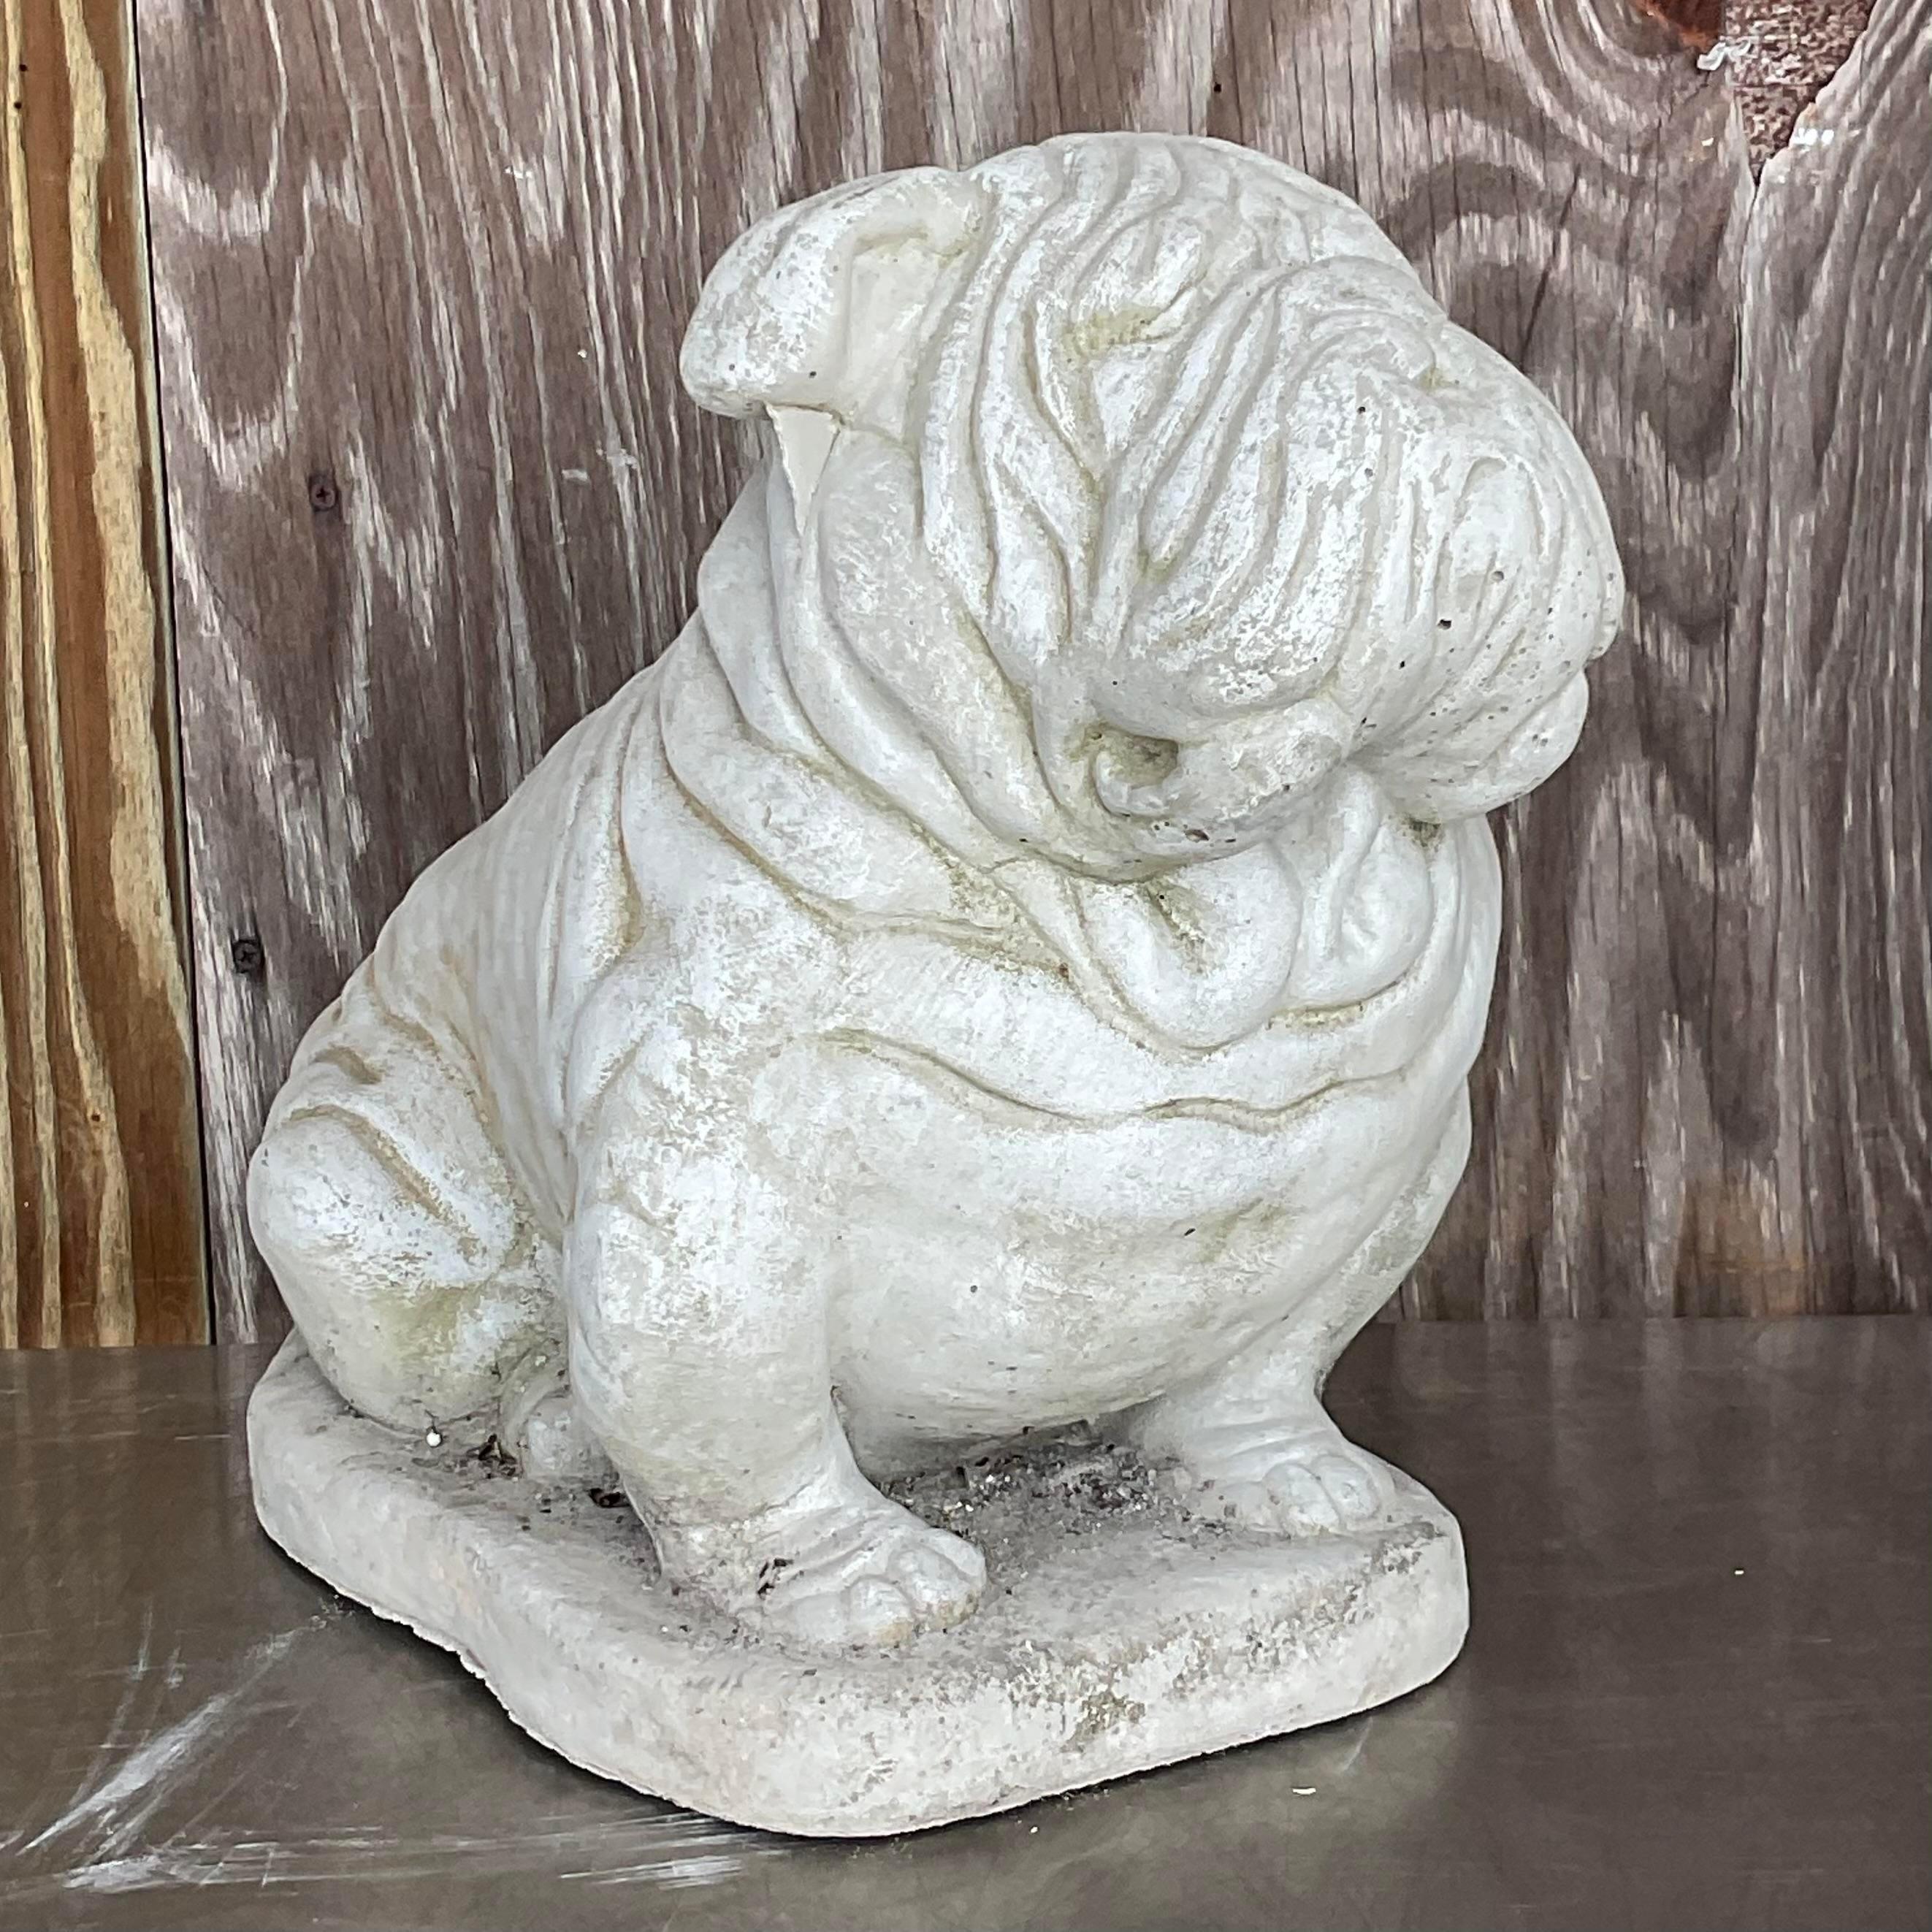 Add whimsy to your décor with our Vintage Boho Cast Cement Bulldog. American-crafted and full of character, this bulldog statue captures boho charm in durable cement, making it a playful and enduring accent for any space.